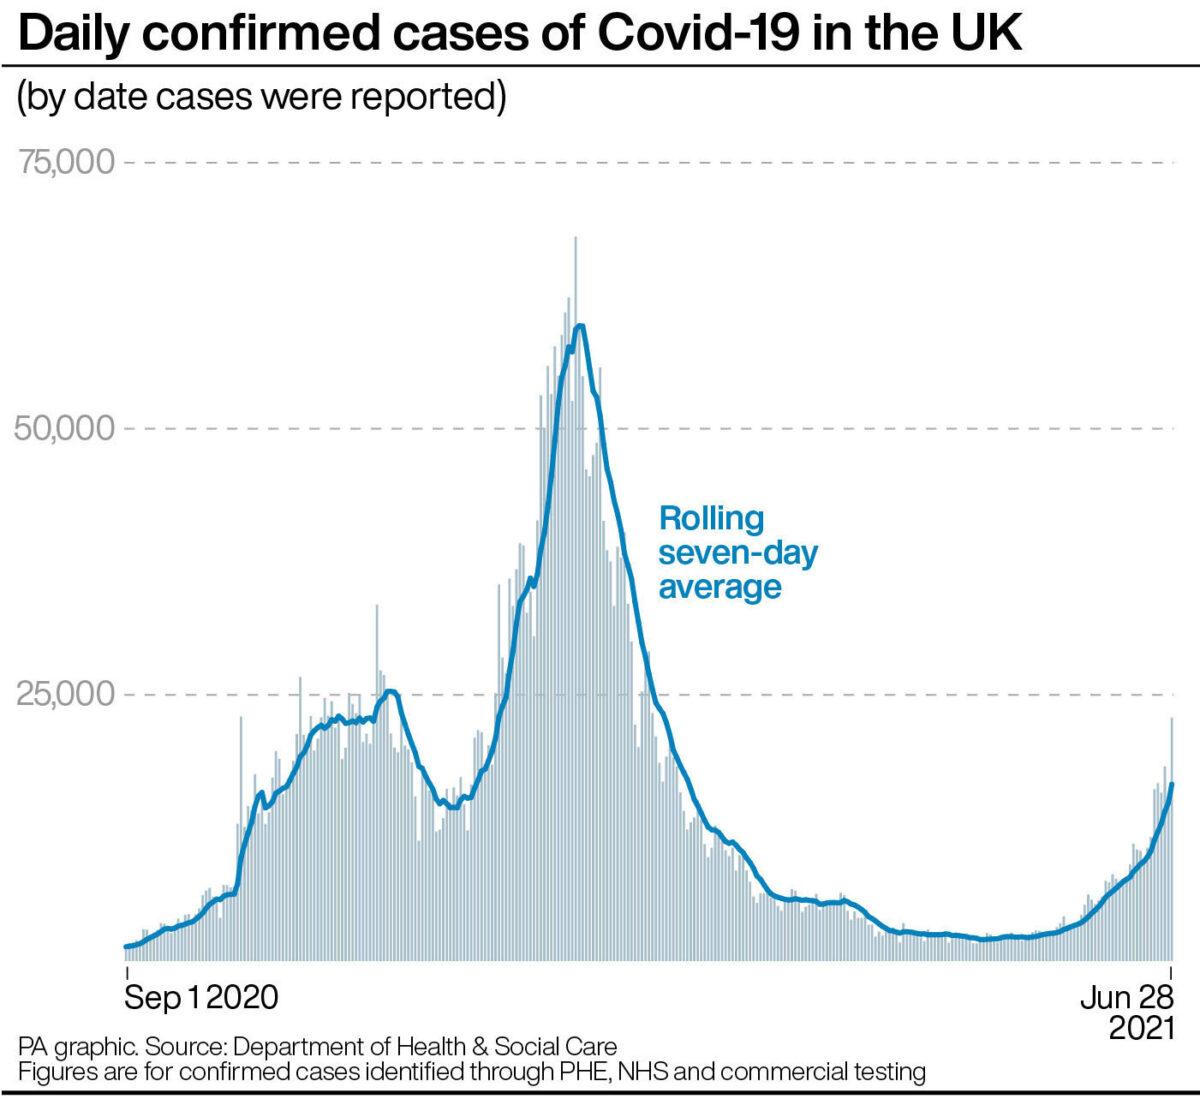 Daily confirmed cases of COVID-19 in the UK, by June 28, 2021. (Infographic PA Graphics/PA)